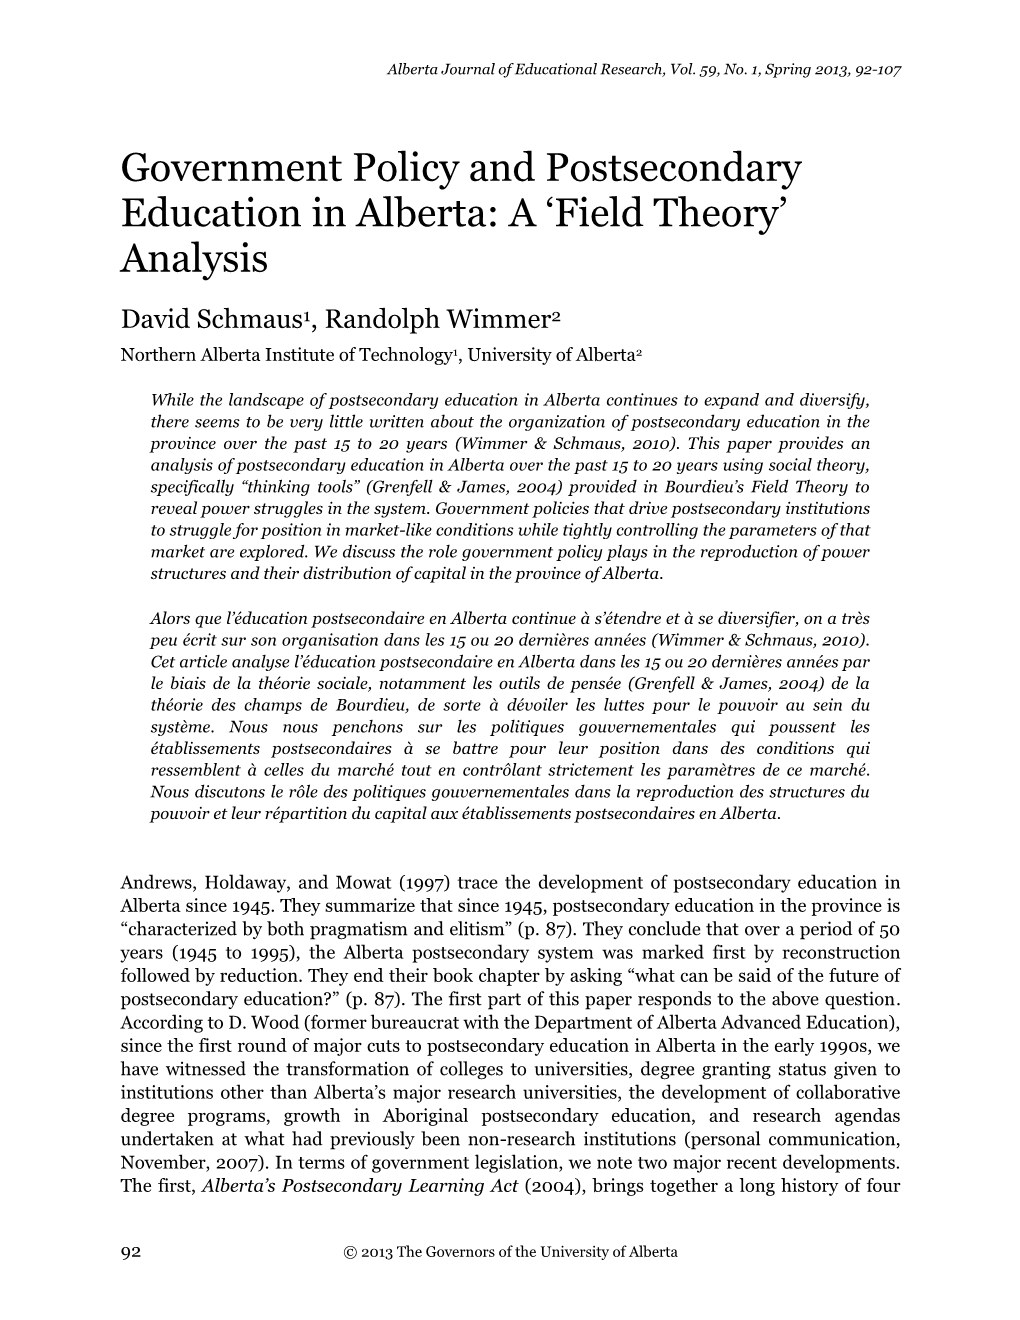 Government Policy and Postsecondary Education in Alberta: a ‘Field Theory’ Analysis